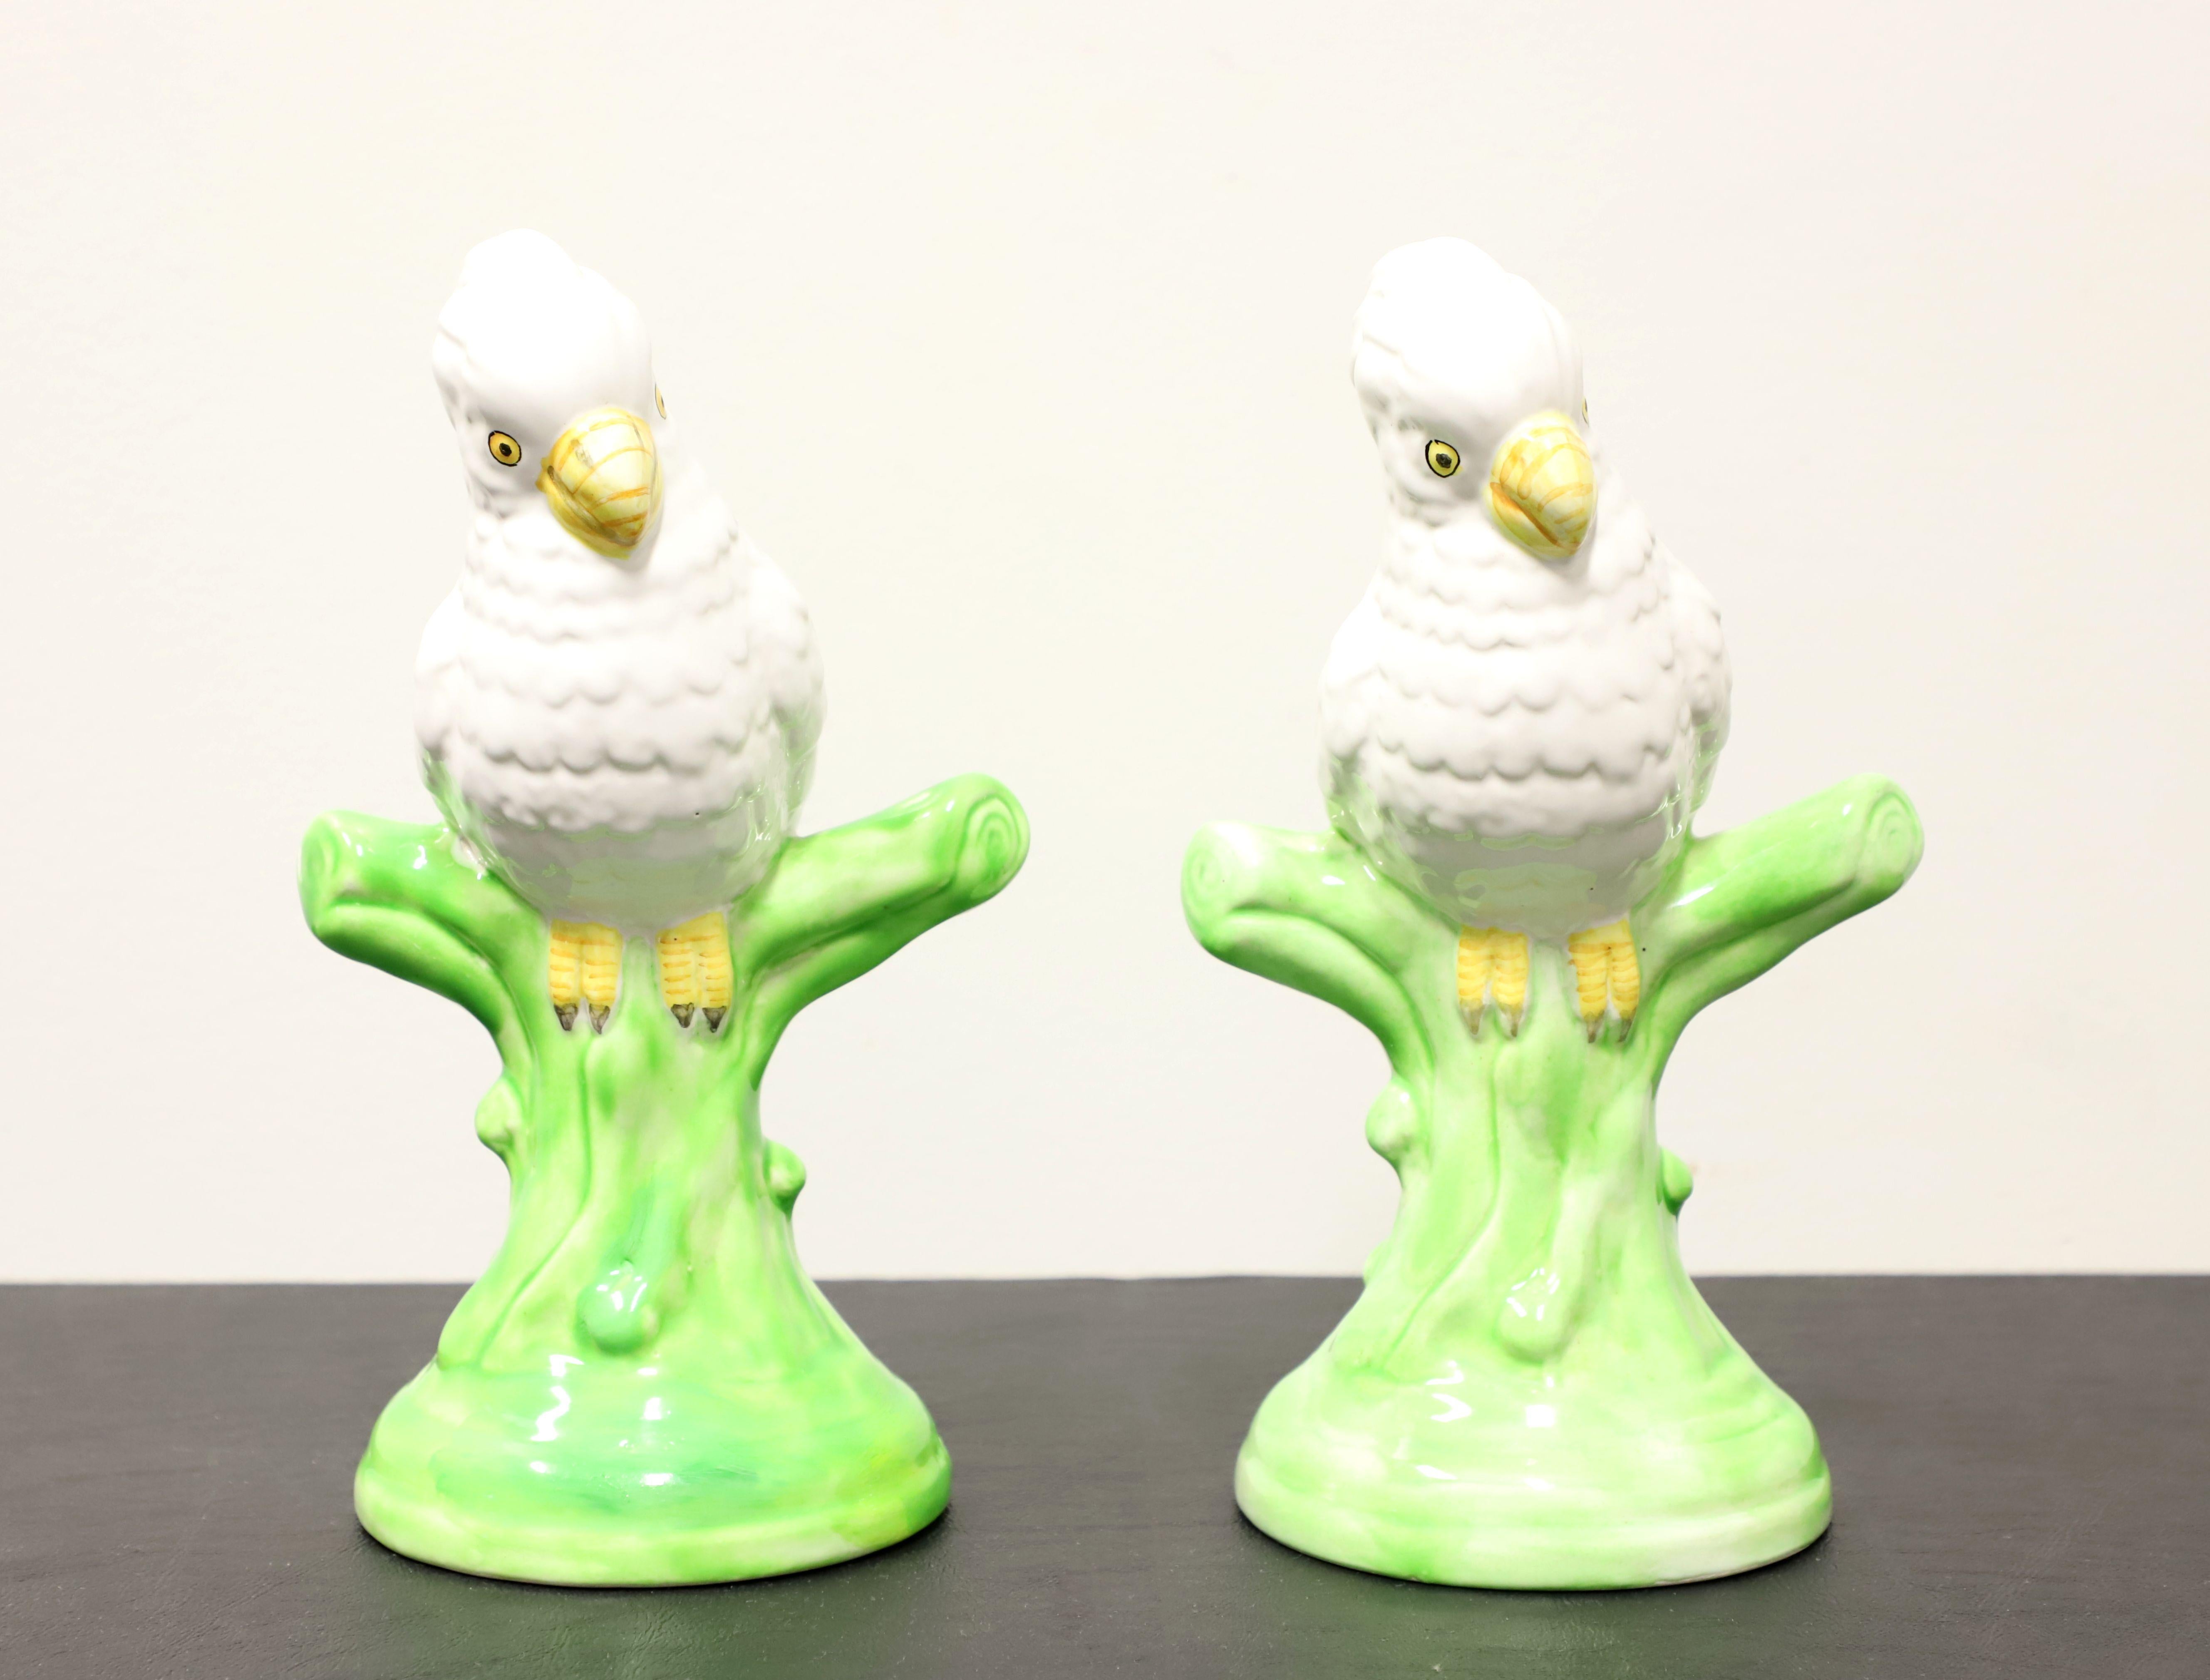 A pair of porcelain figurines depicting white parrots on tree branches. Multi-colored porcelain of primarily white, green, yellow & black, and glazed. Unsigned, artist unknown. Made in Italy, likely in the mid 20th Century.

Measures:  5.5w 4.5d